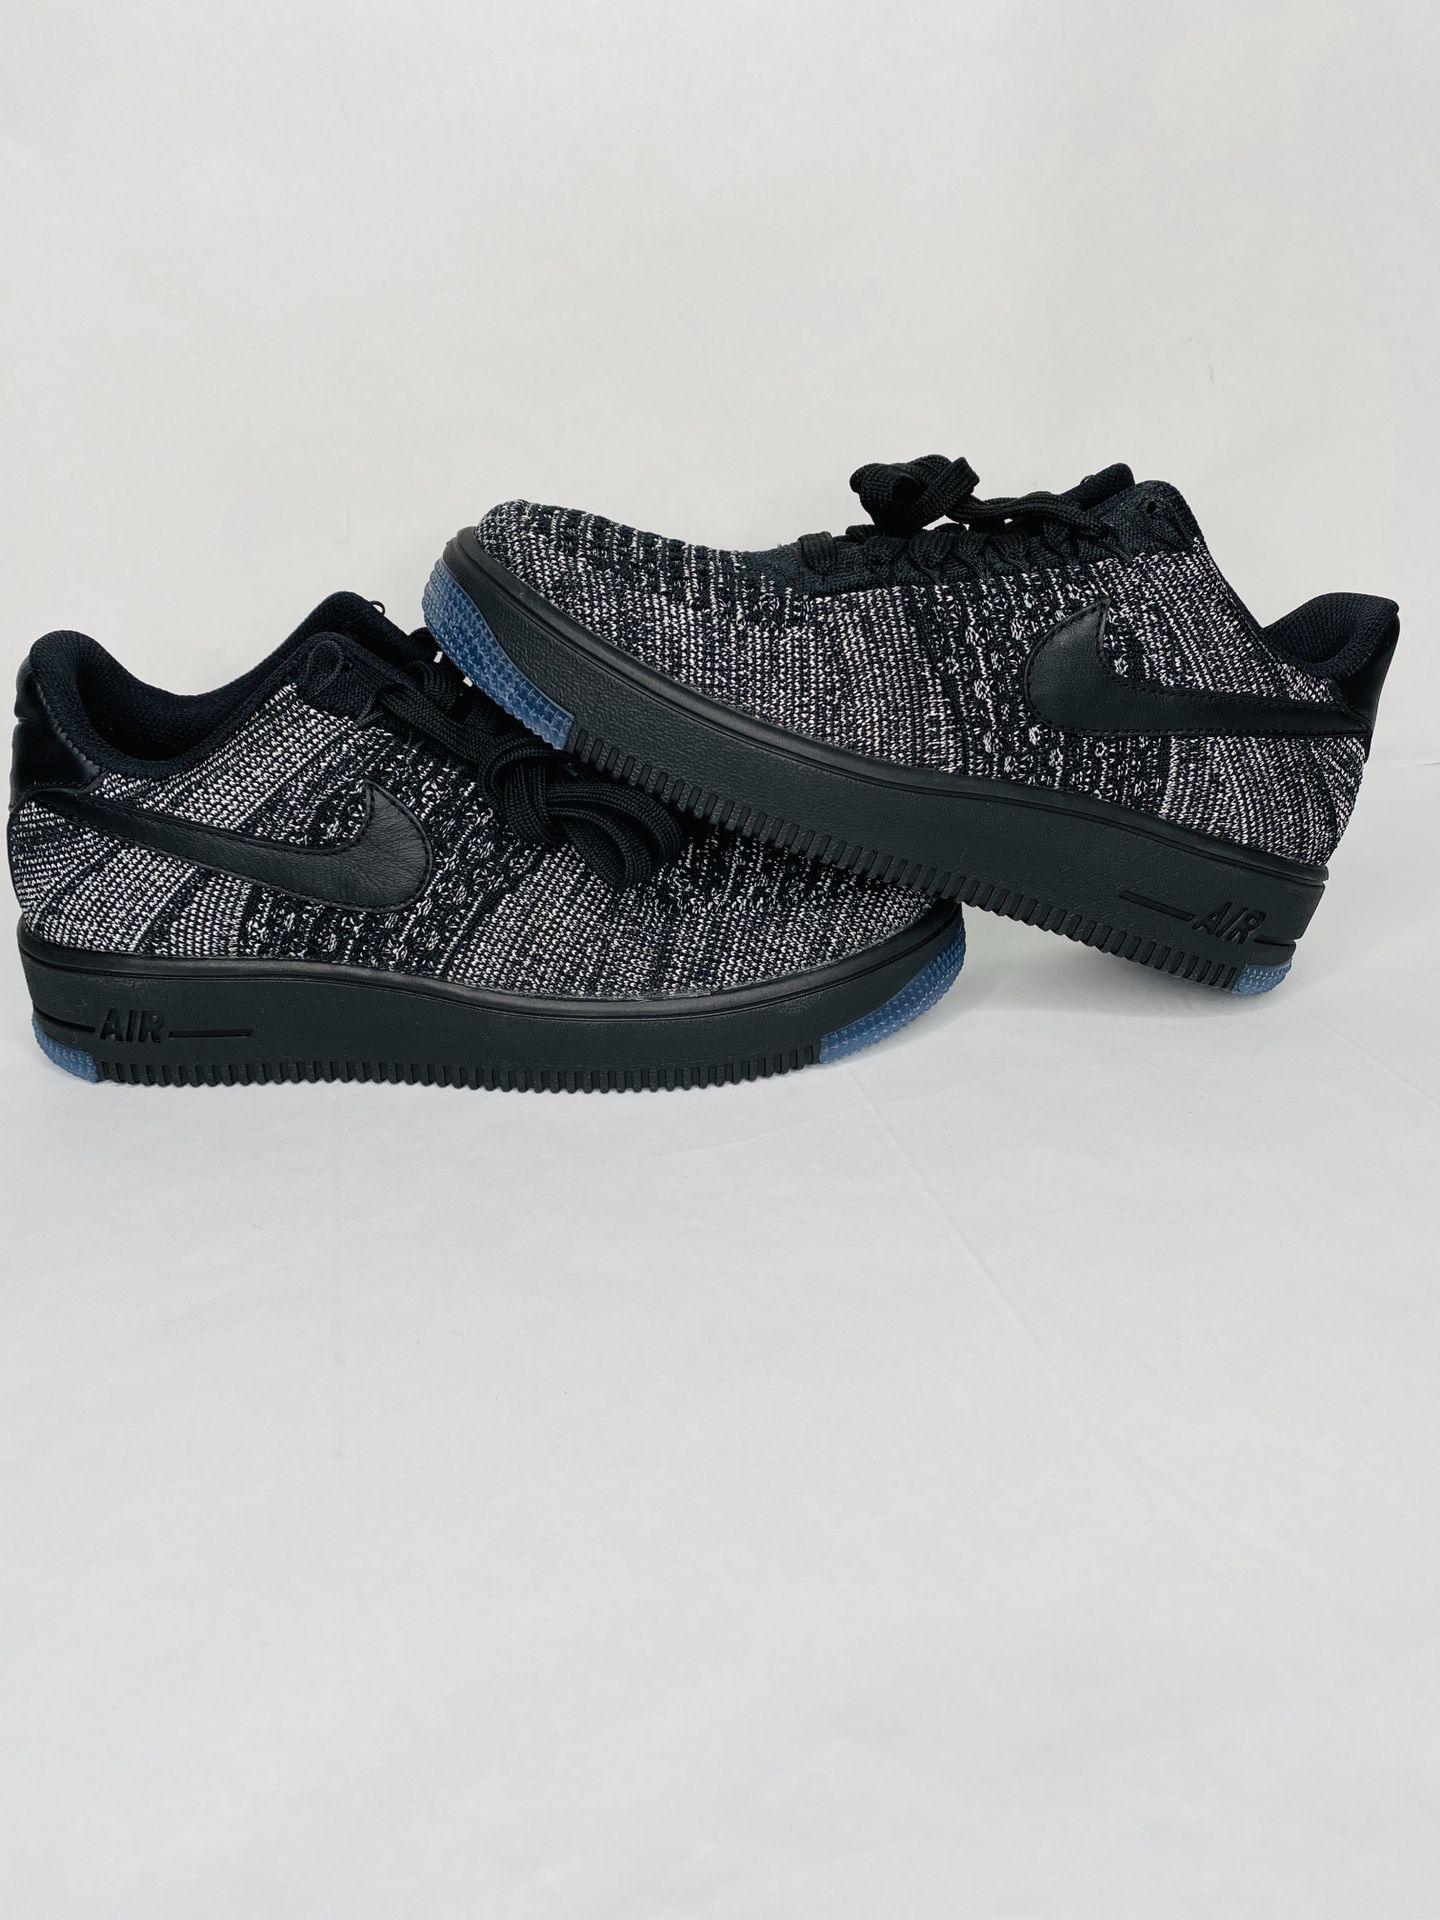 Nike Air Force 1 AF1 Flyknit Low Black Women's Size 5 & 7.5 820256-007. Shipped with Priority Mail. Brand new without original box for Sale in Dundalk, MD - OfferUp